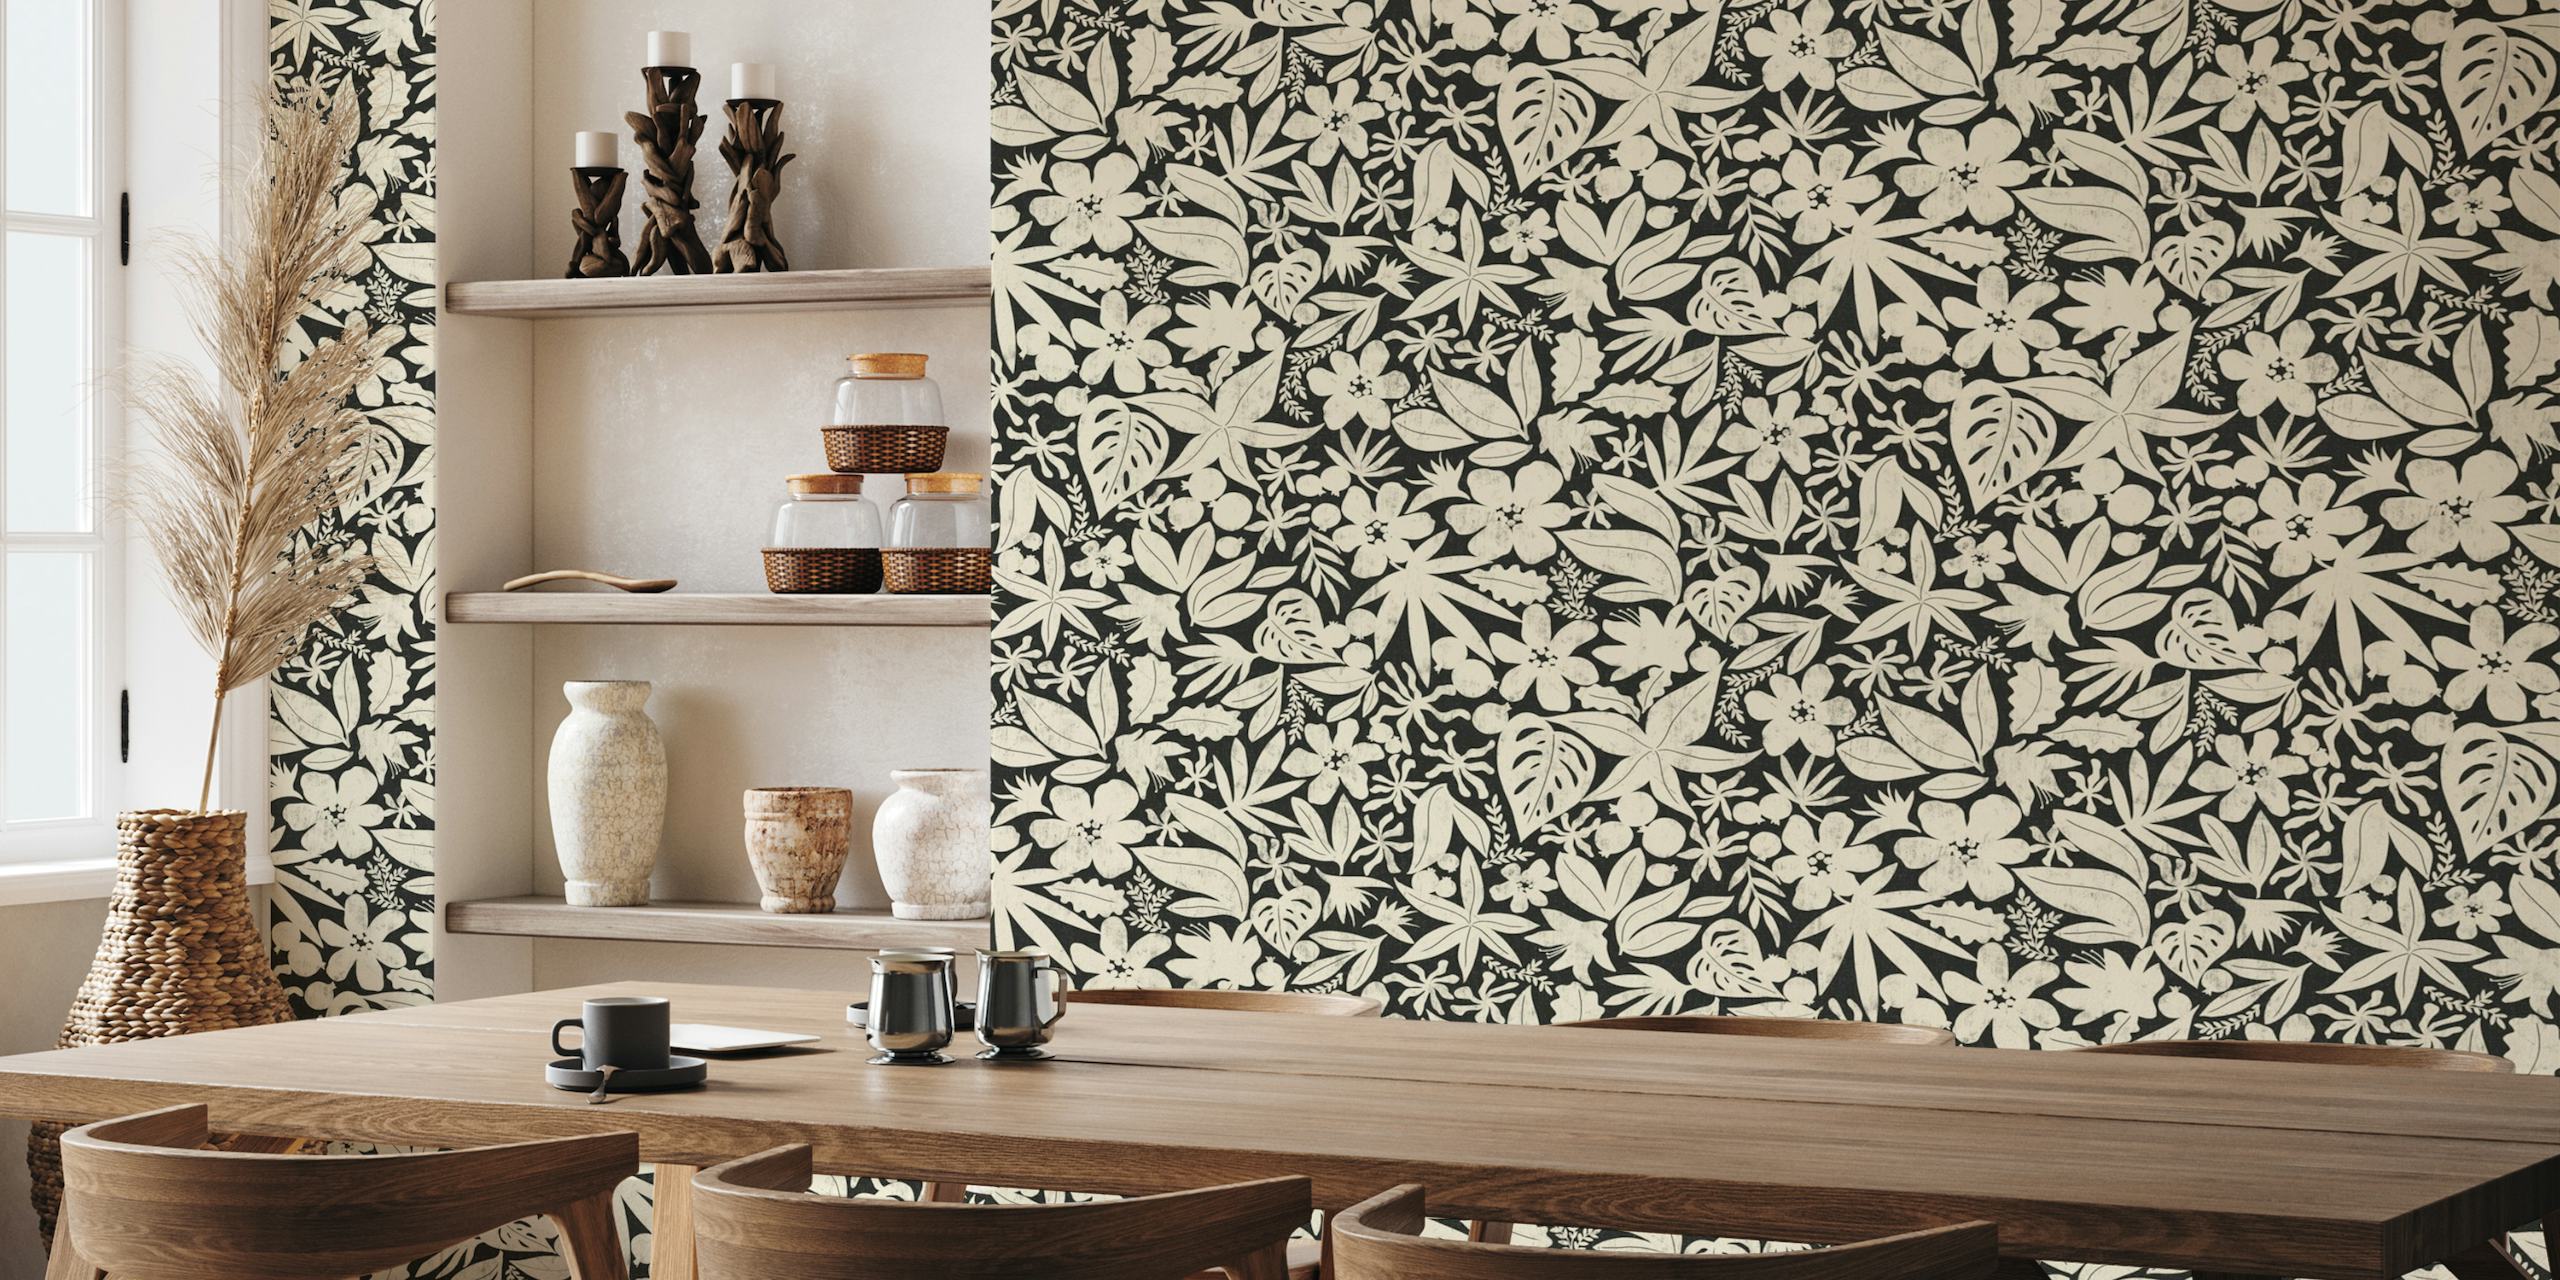 Cozy ivory and black floral pattern wall mural